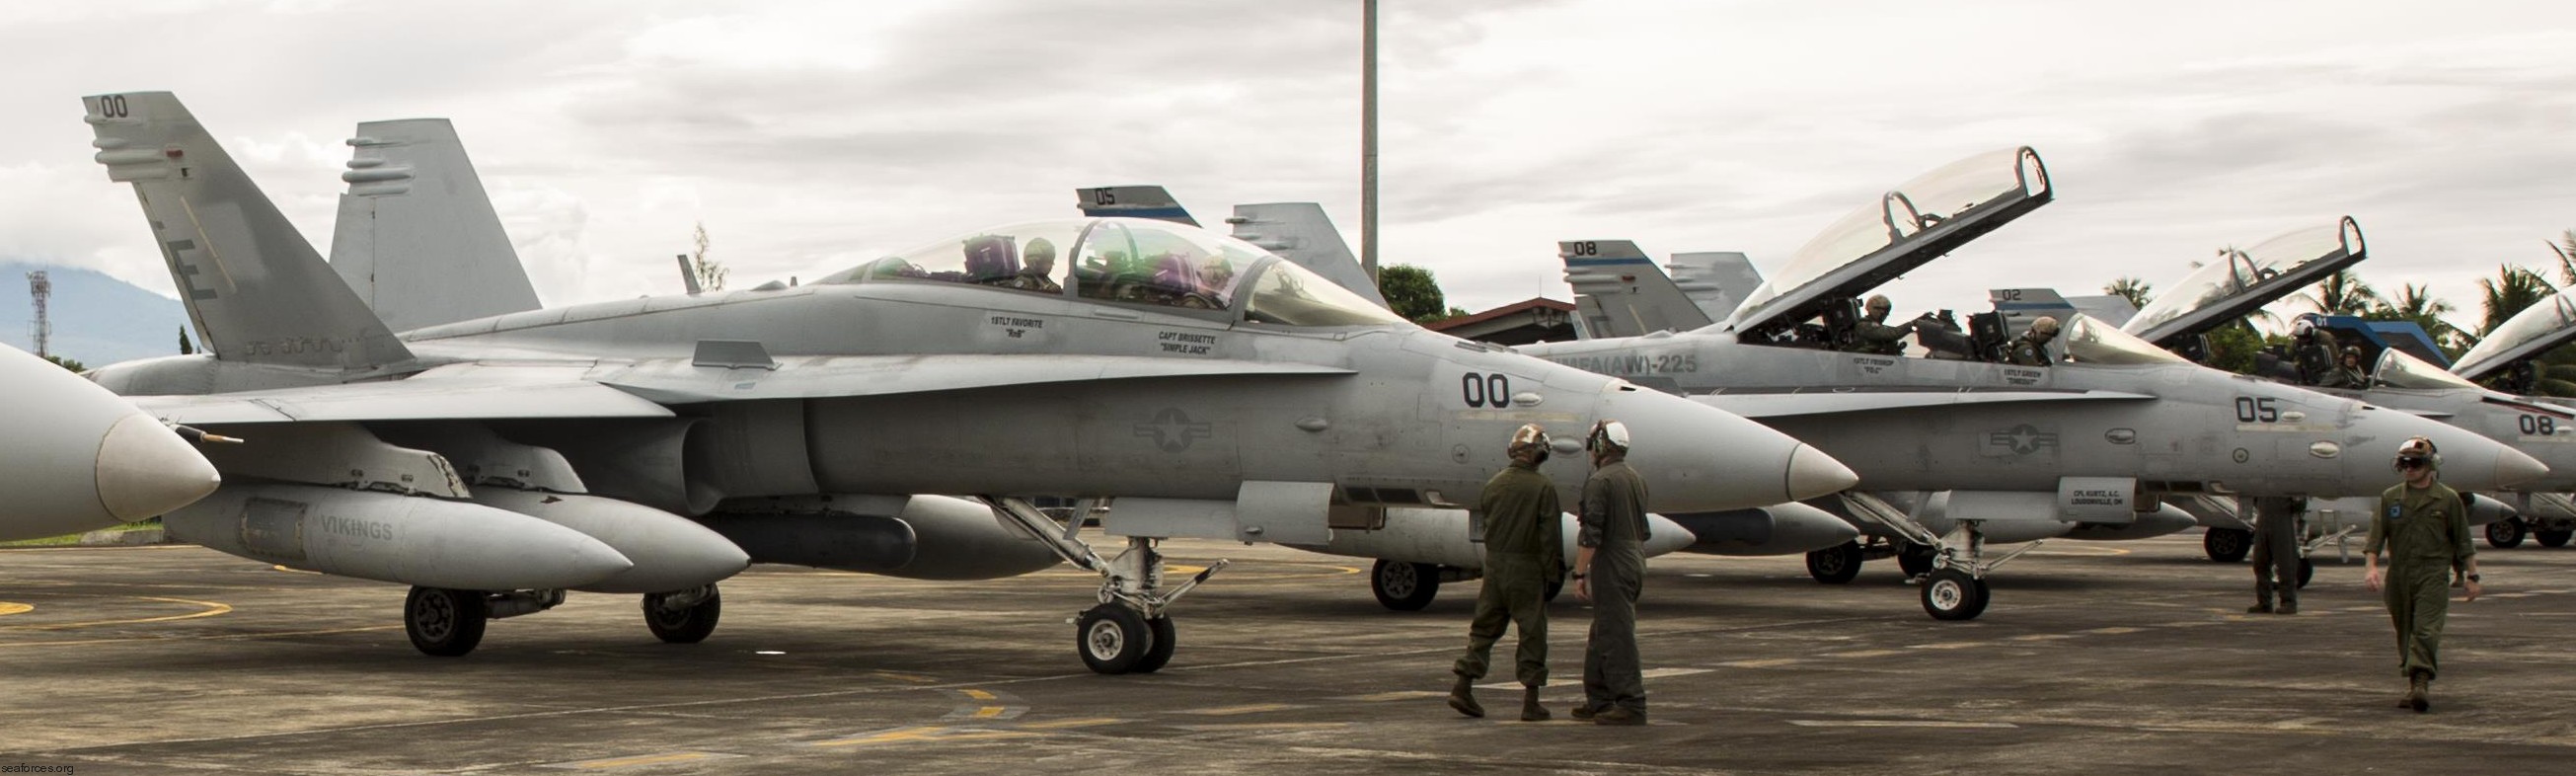 vmfa(aw)-225 vikings marine fighter attack squadron f/a-18d hornet 32